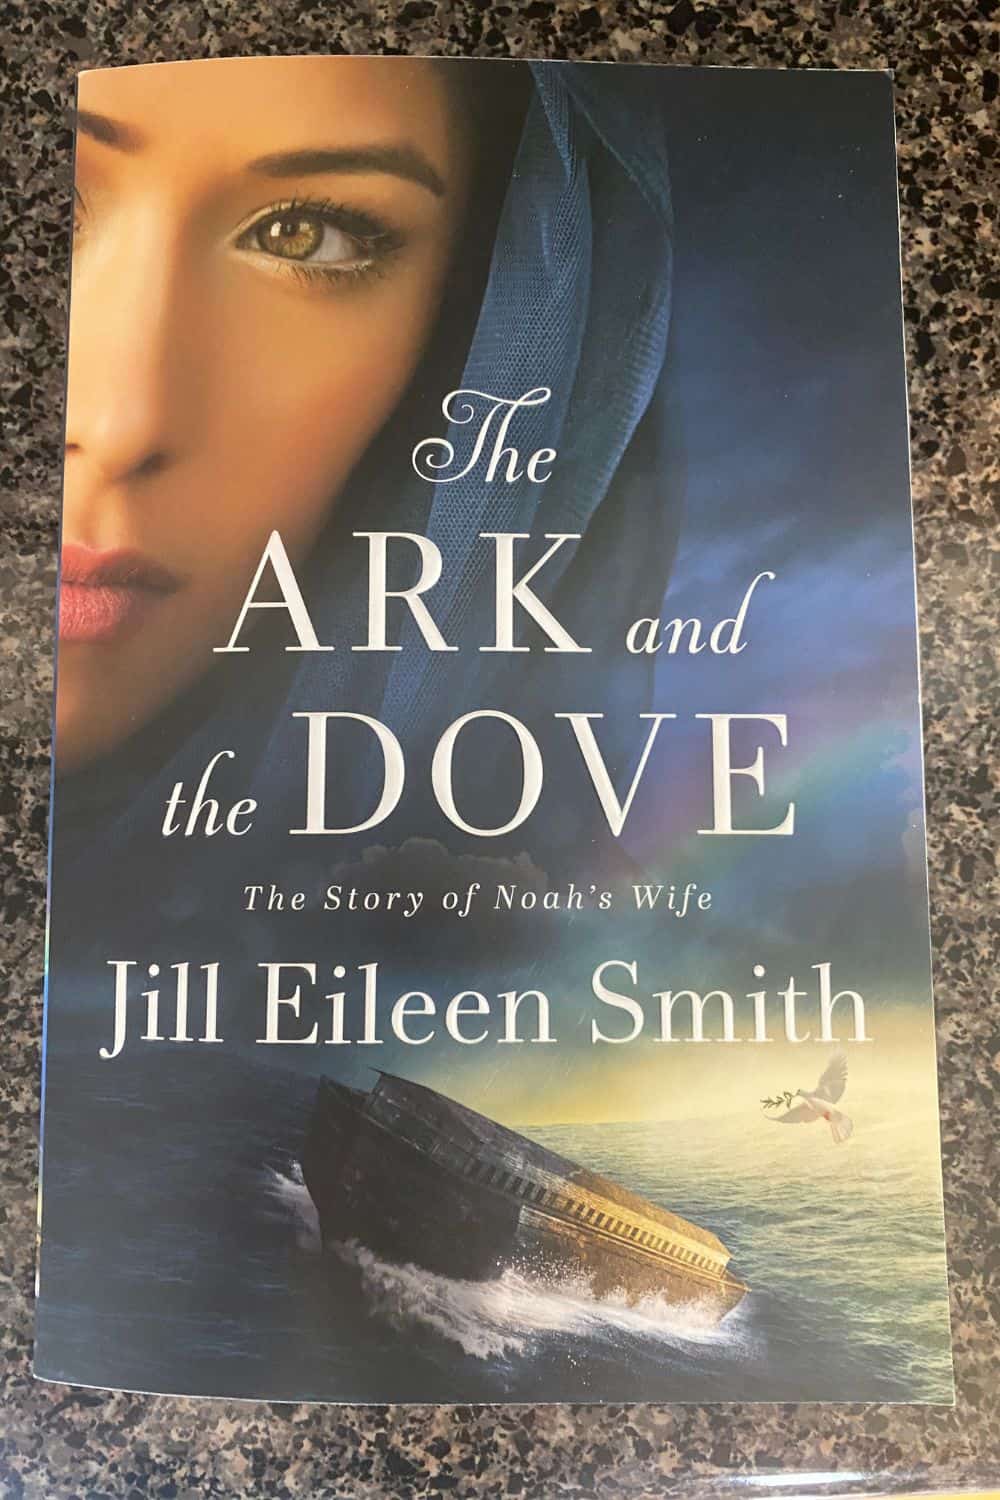 Book Review: The Ark and the Dove by Jill Eileen Smith